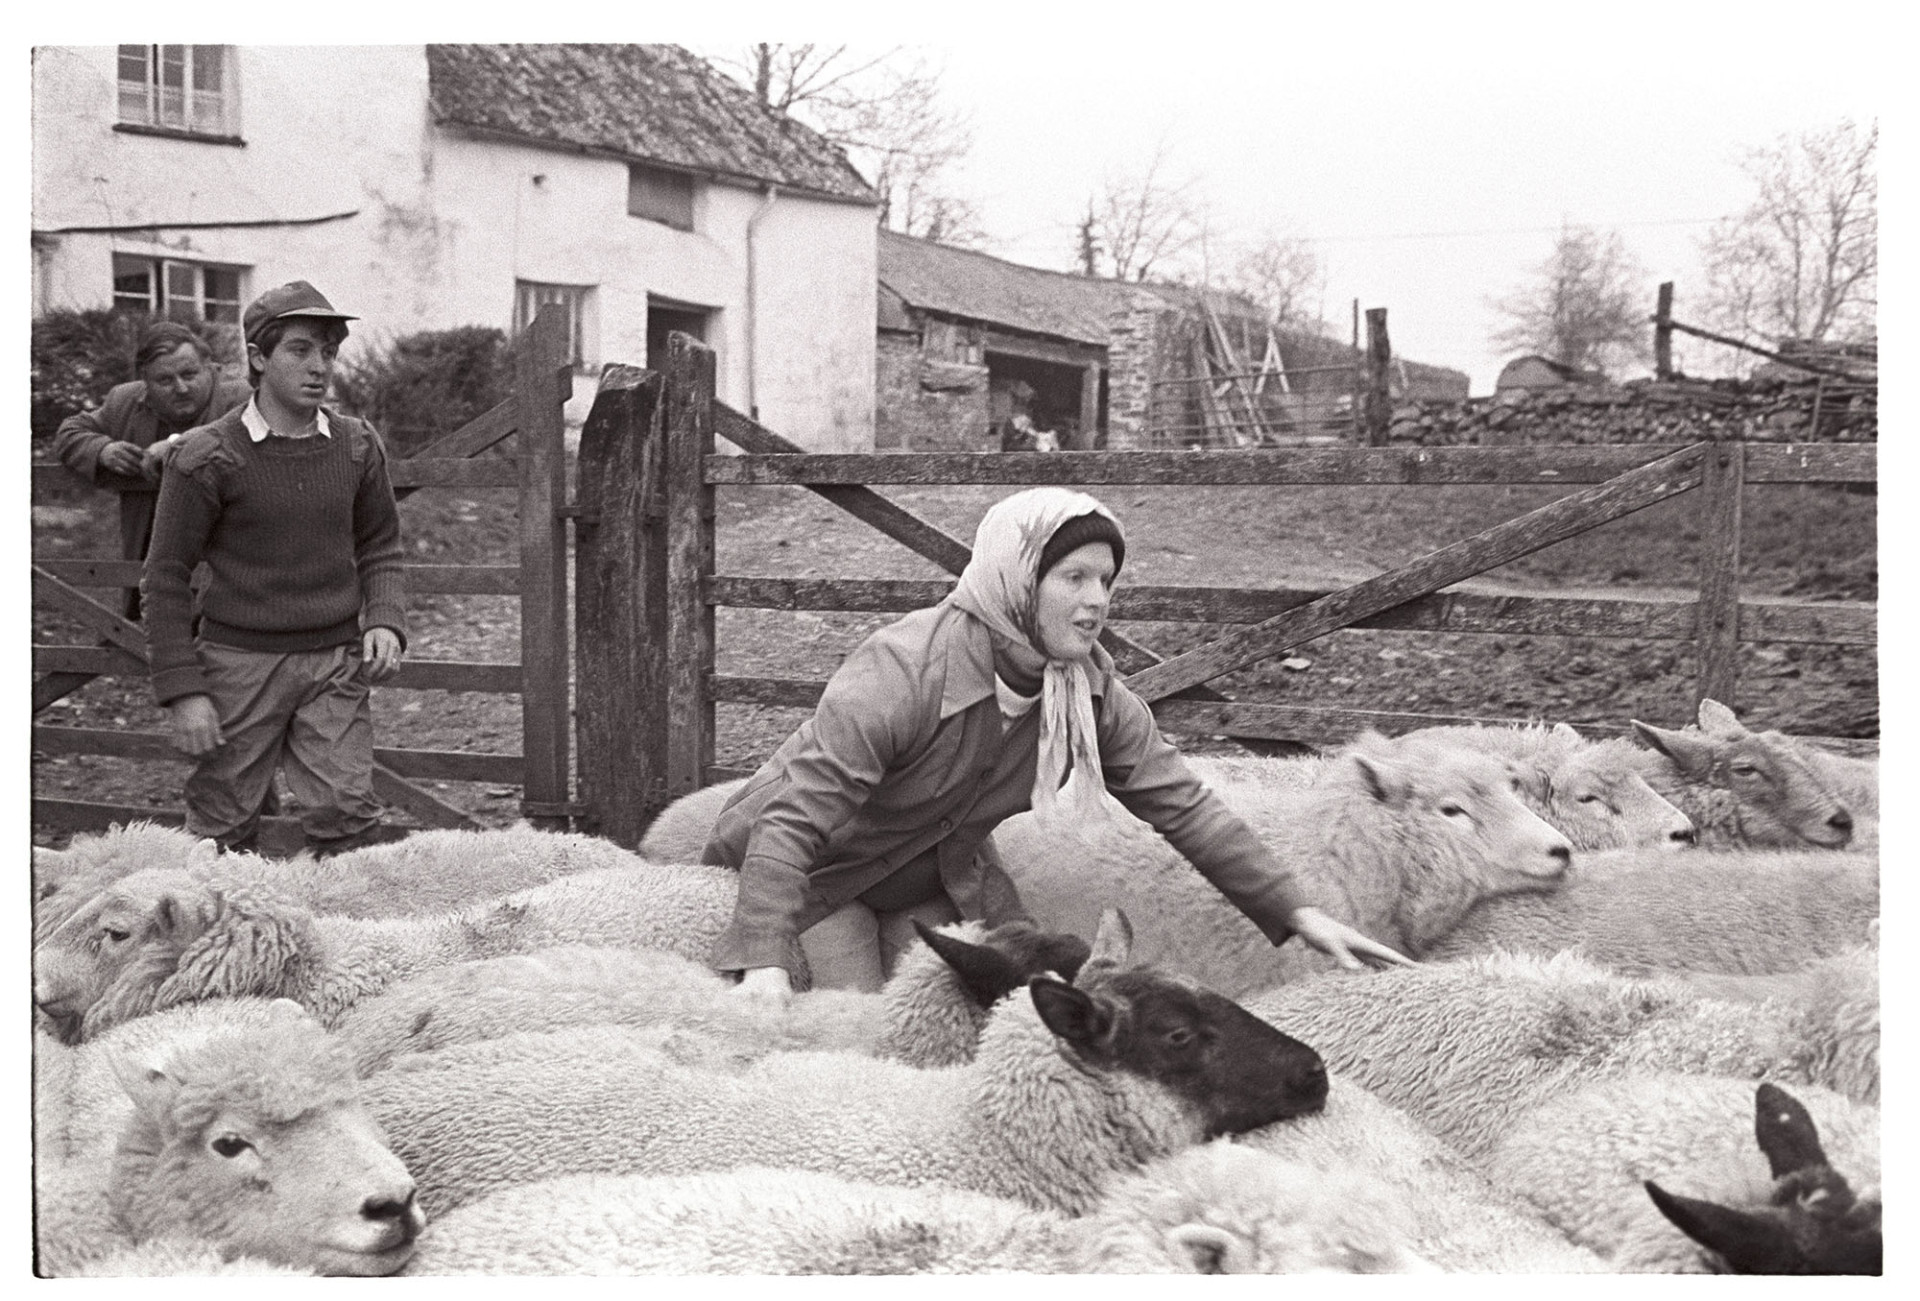 Woman herding sheep in pen. 
[A woman, possibly Mrs Pugsley, herding sheep in a wooden pen at Lower Langham, Dolton. The farmhouse is in the background and two men are watching.]